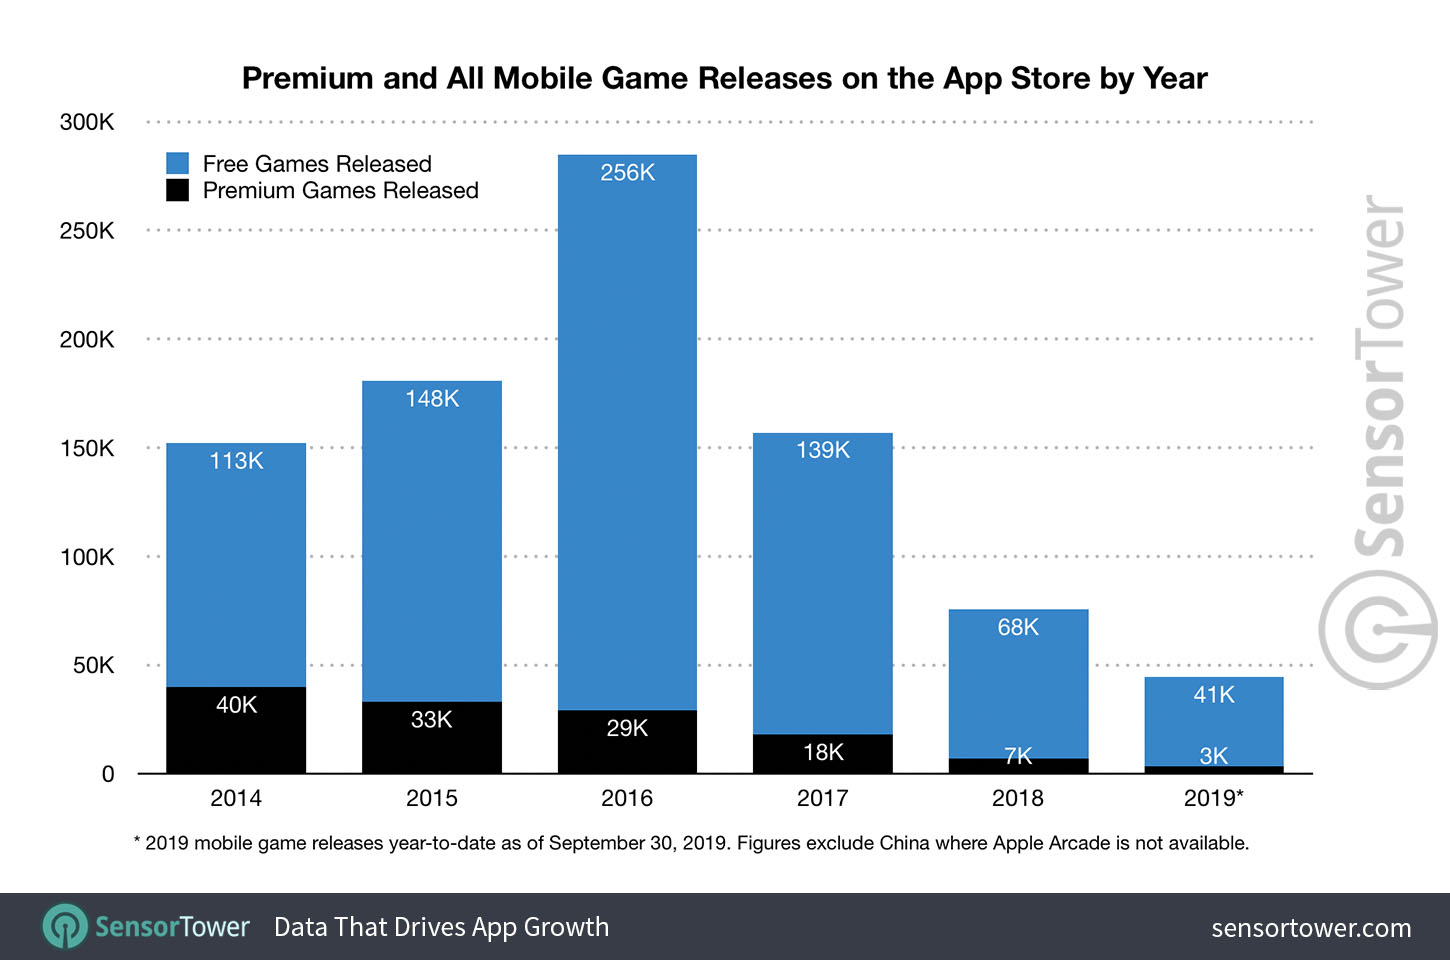 Number of premium and all game releases on the App Store between 2014 to 2019